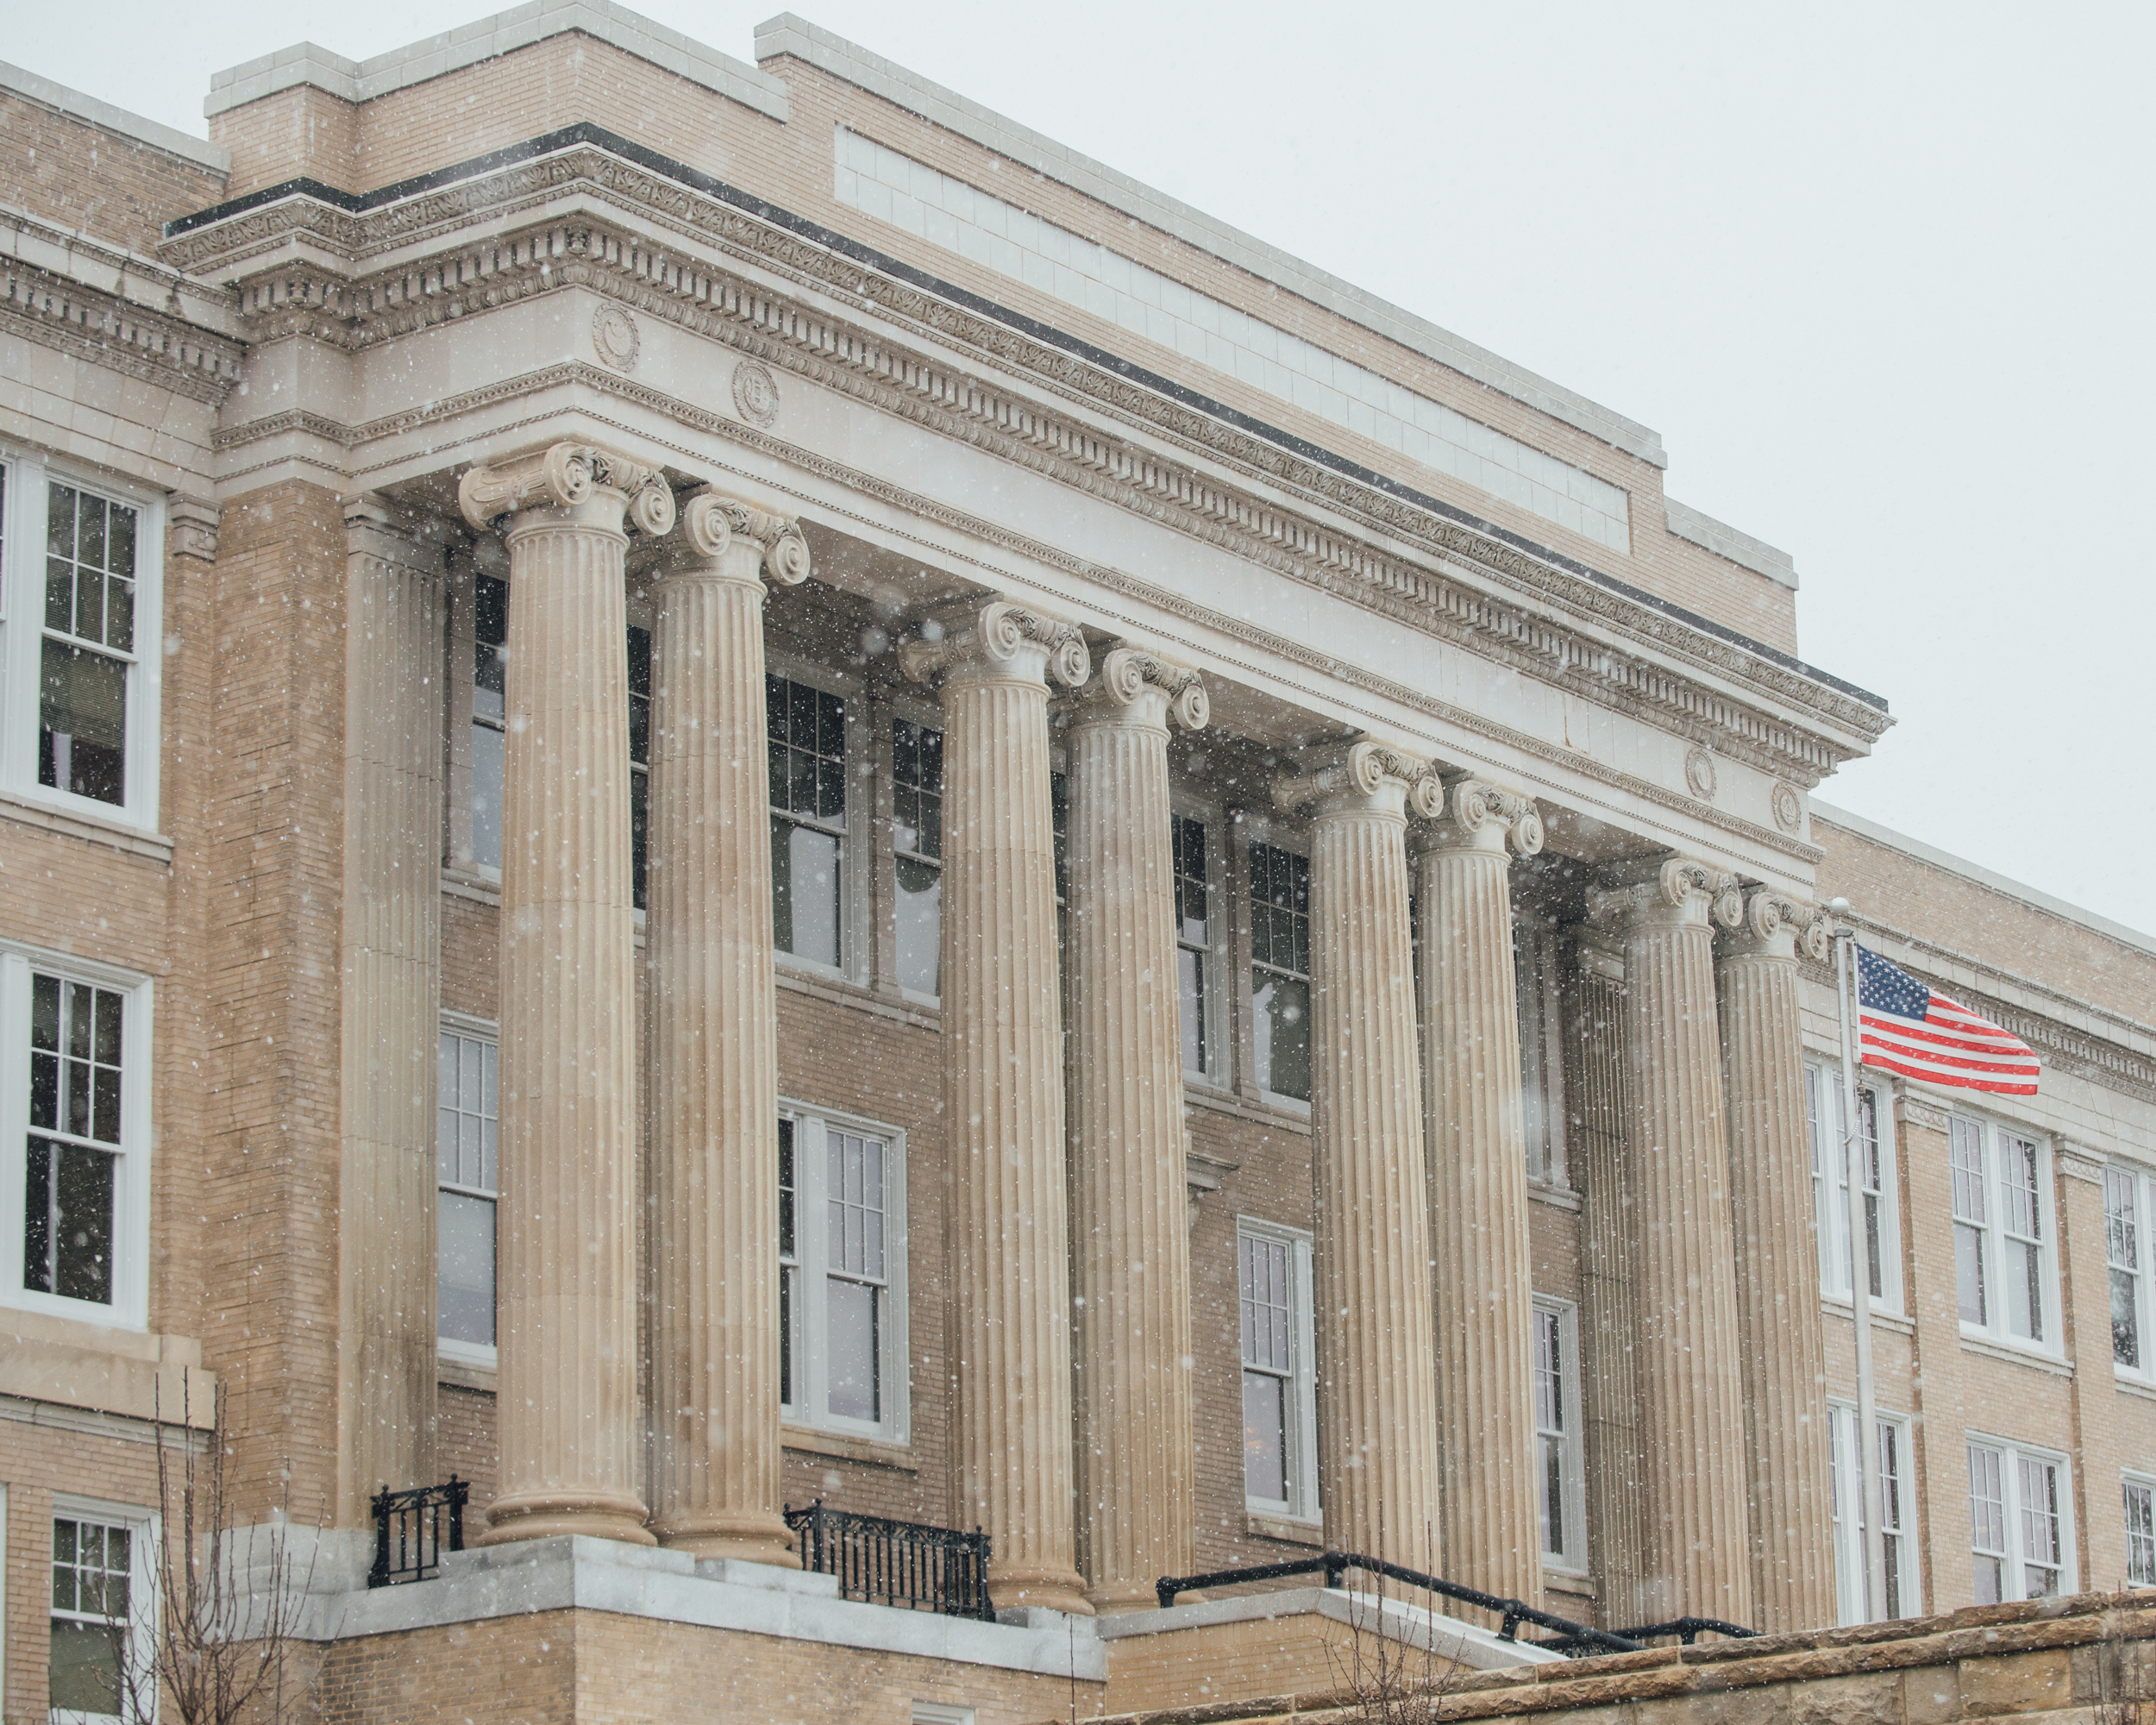 Soft snowflakes fly in front of a classical-looking building with huge stone columns